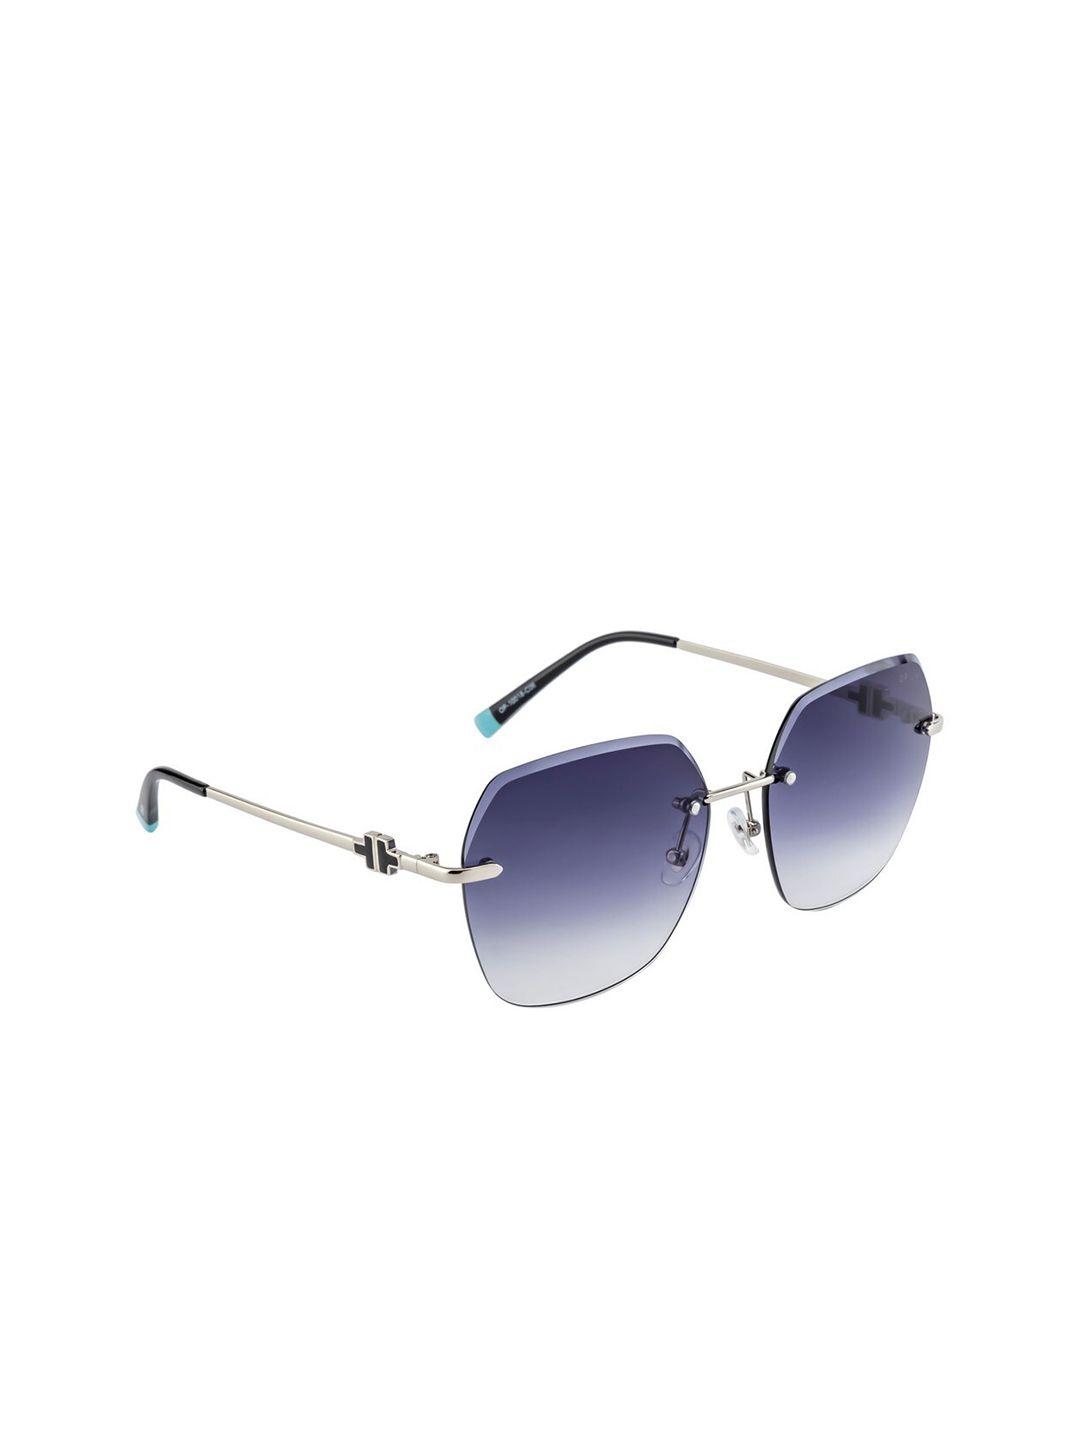 opium women blue lens & silver-toned square sunglasses with uv protected lens